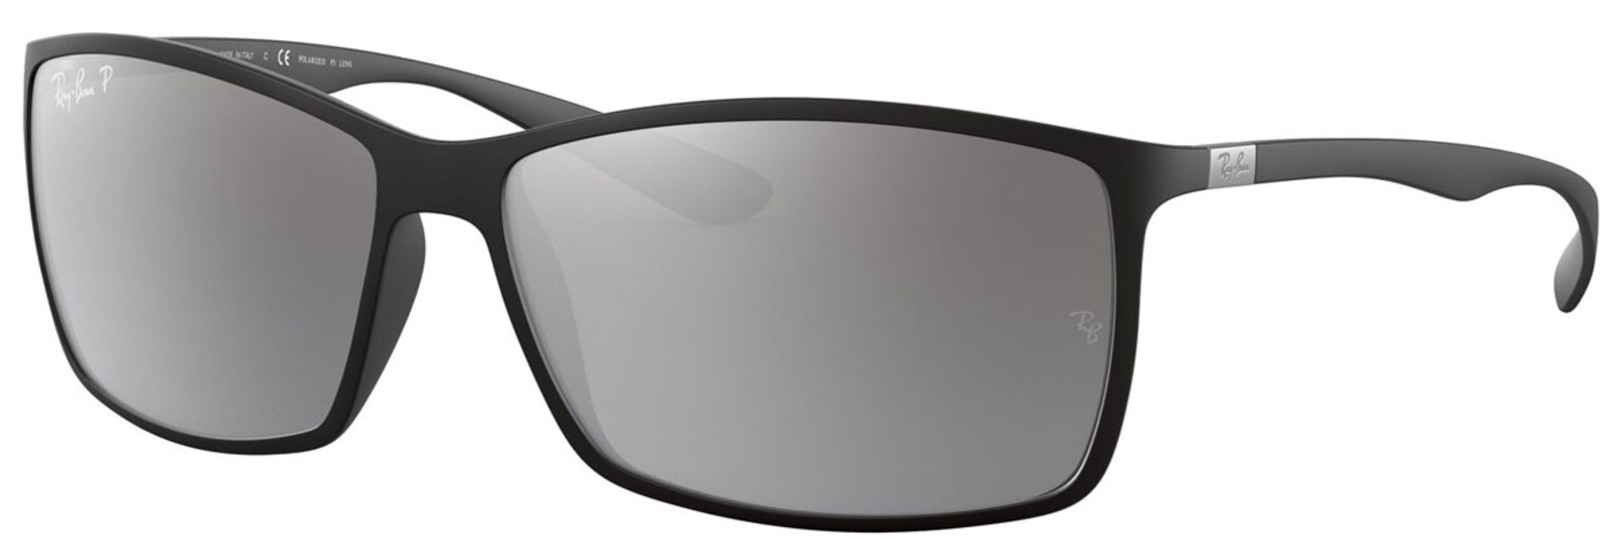 Ray-Ban Liteforce RB4179 601S82